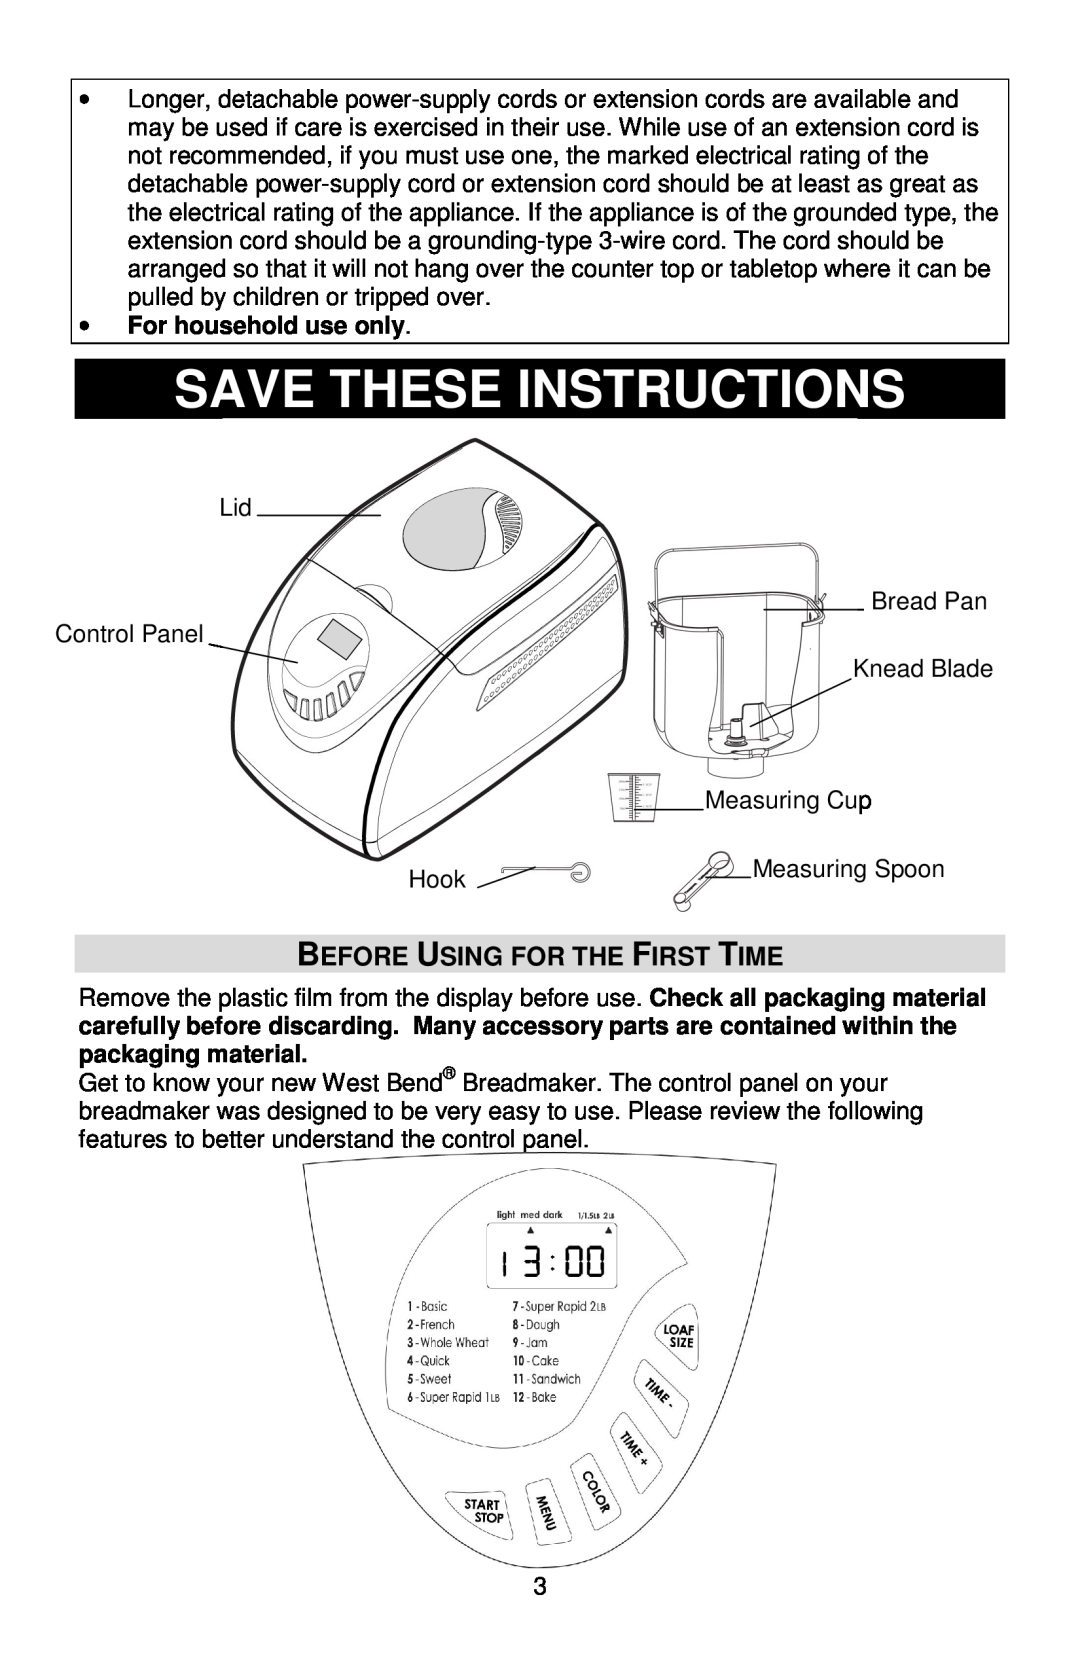 West Bend 41400, L5811A instruction manual Save These Instructions, Before Using For The First Time, For household use only 